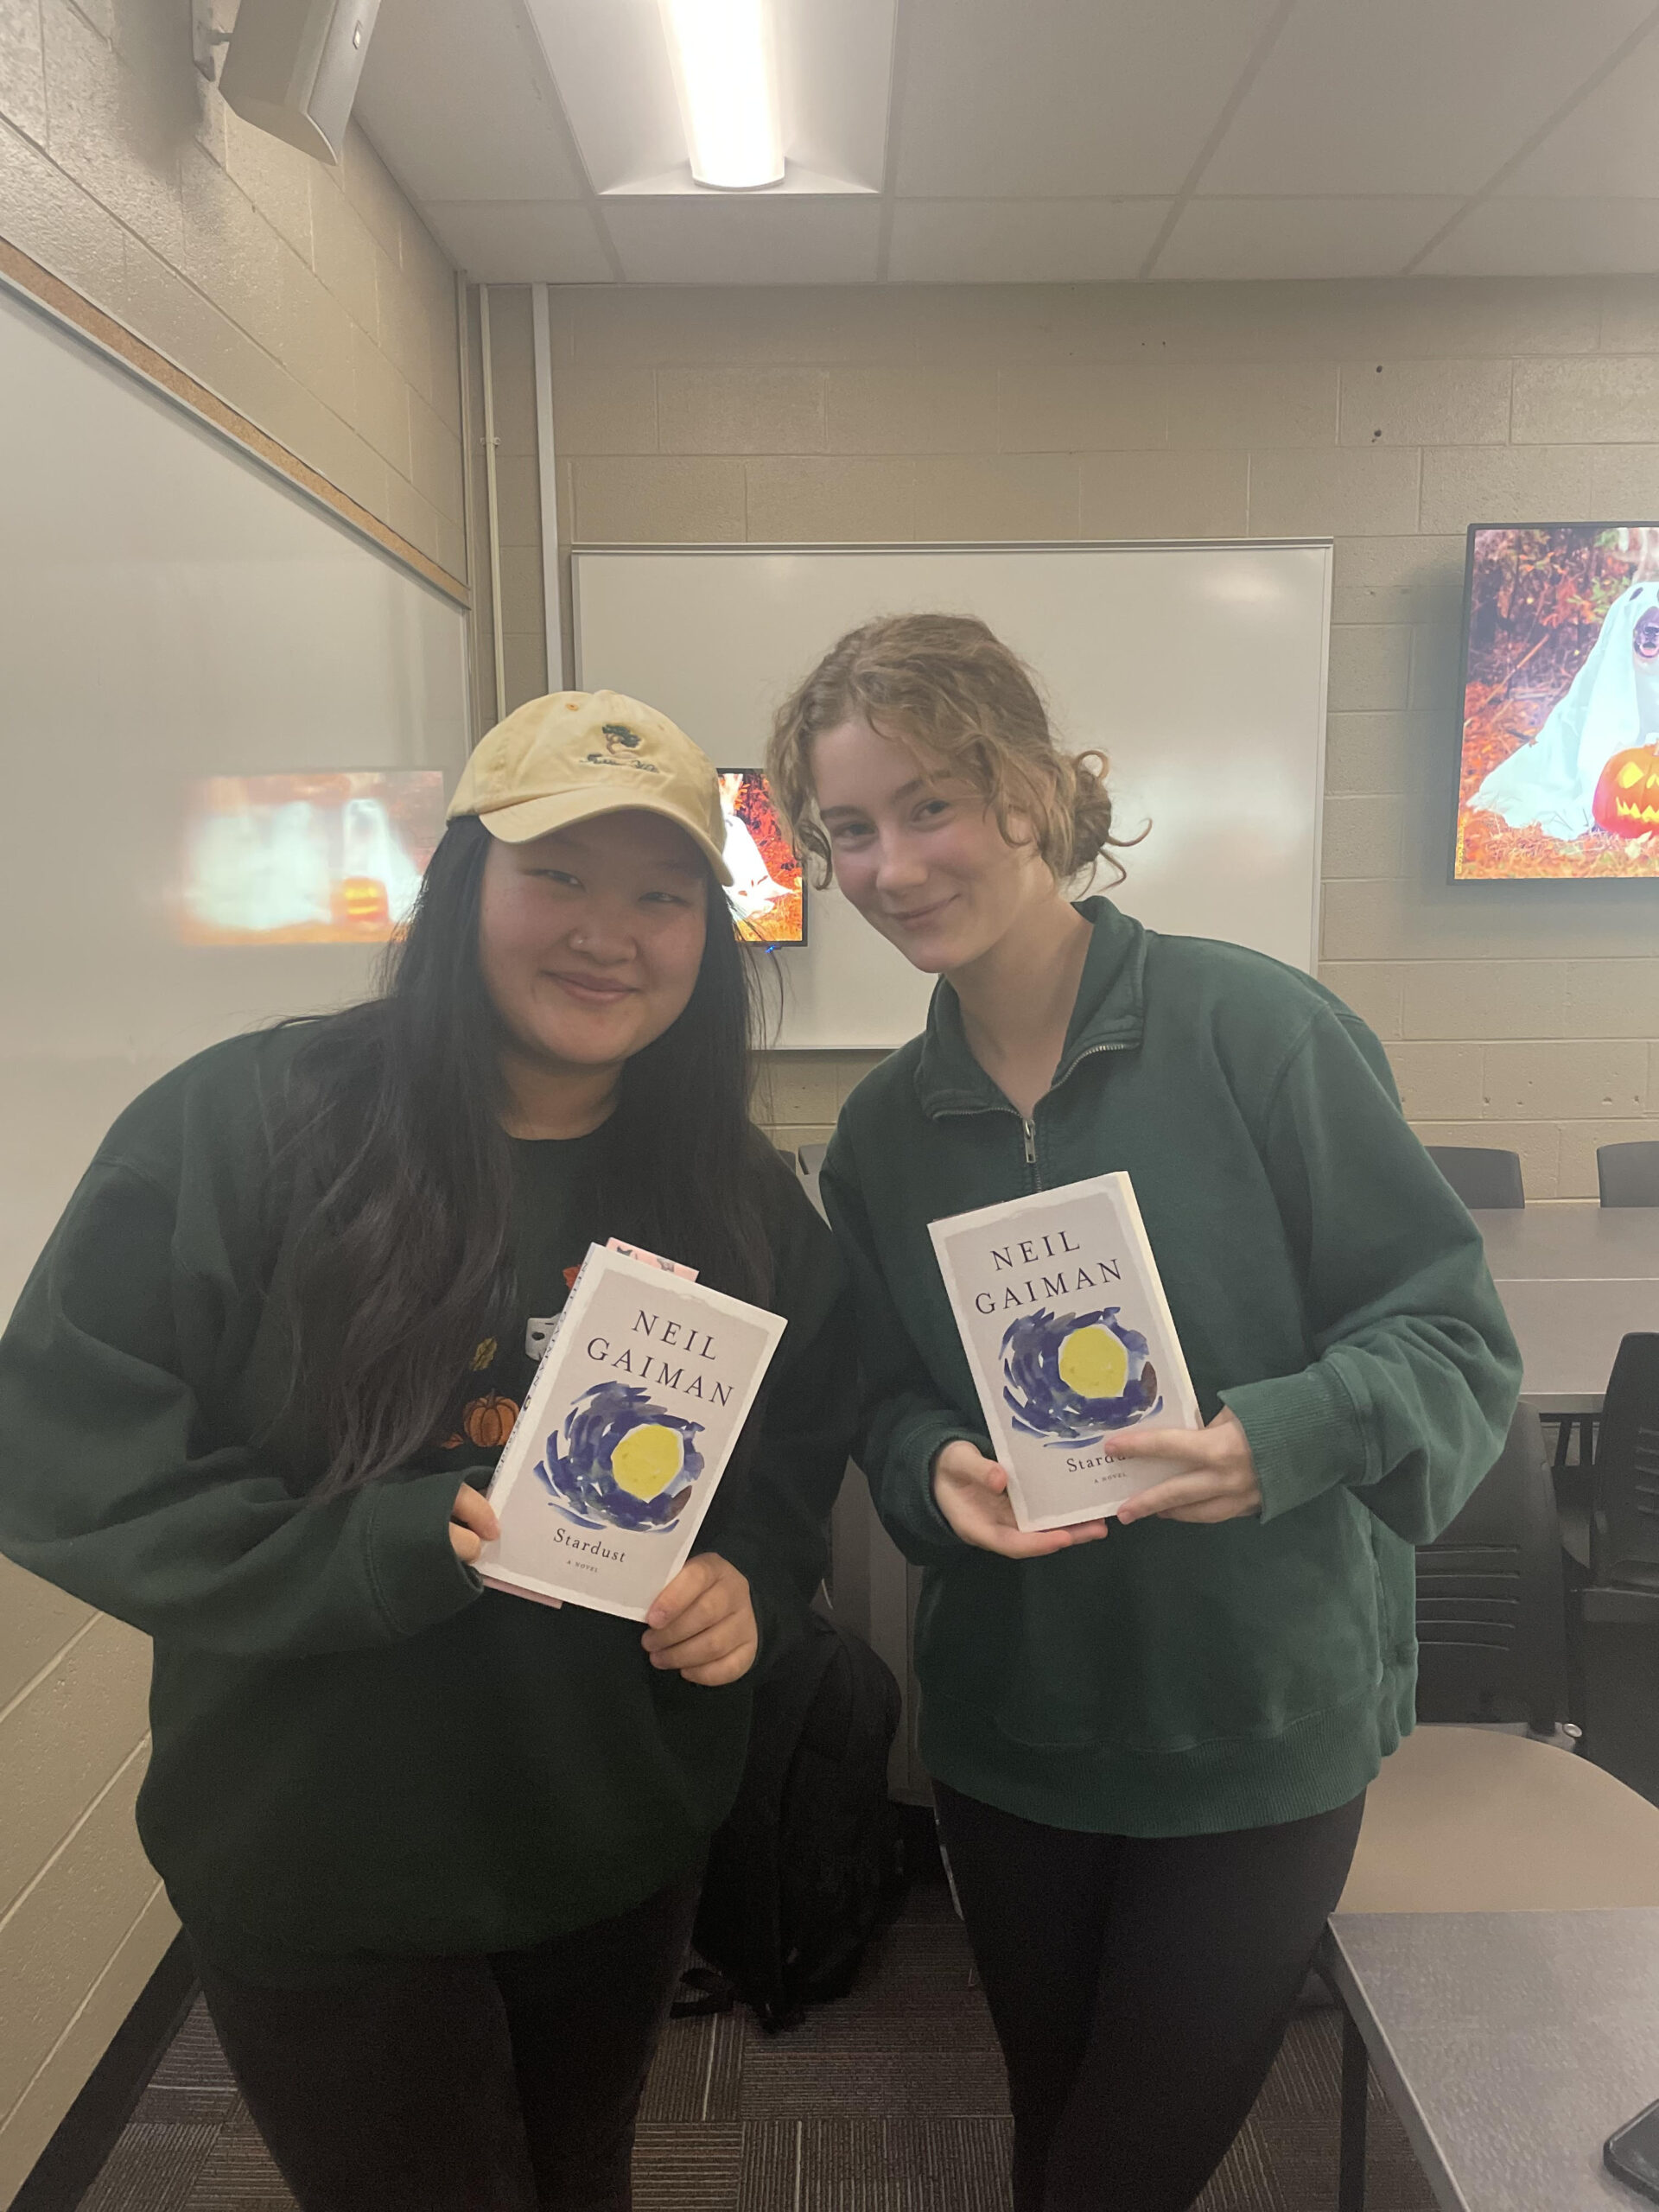 Two students in green sweatshirts pose with copies of Stardust, by Neil Gaiman.